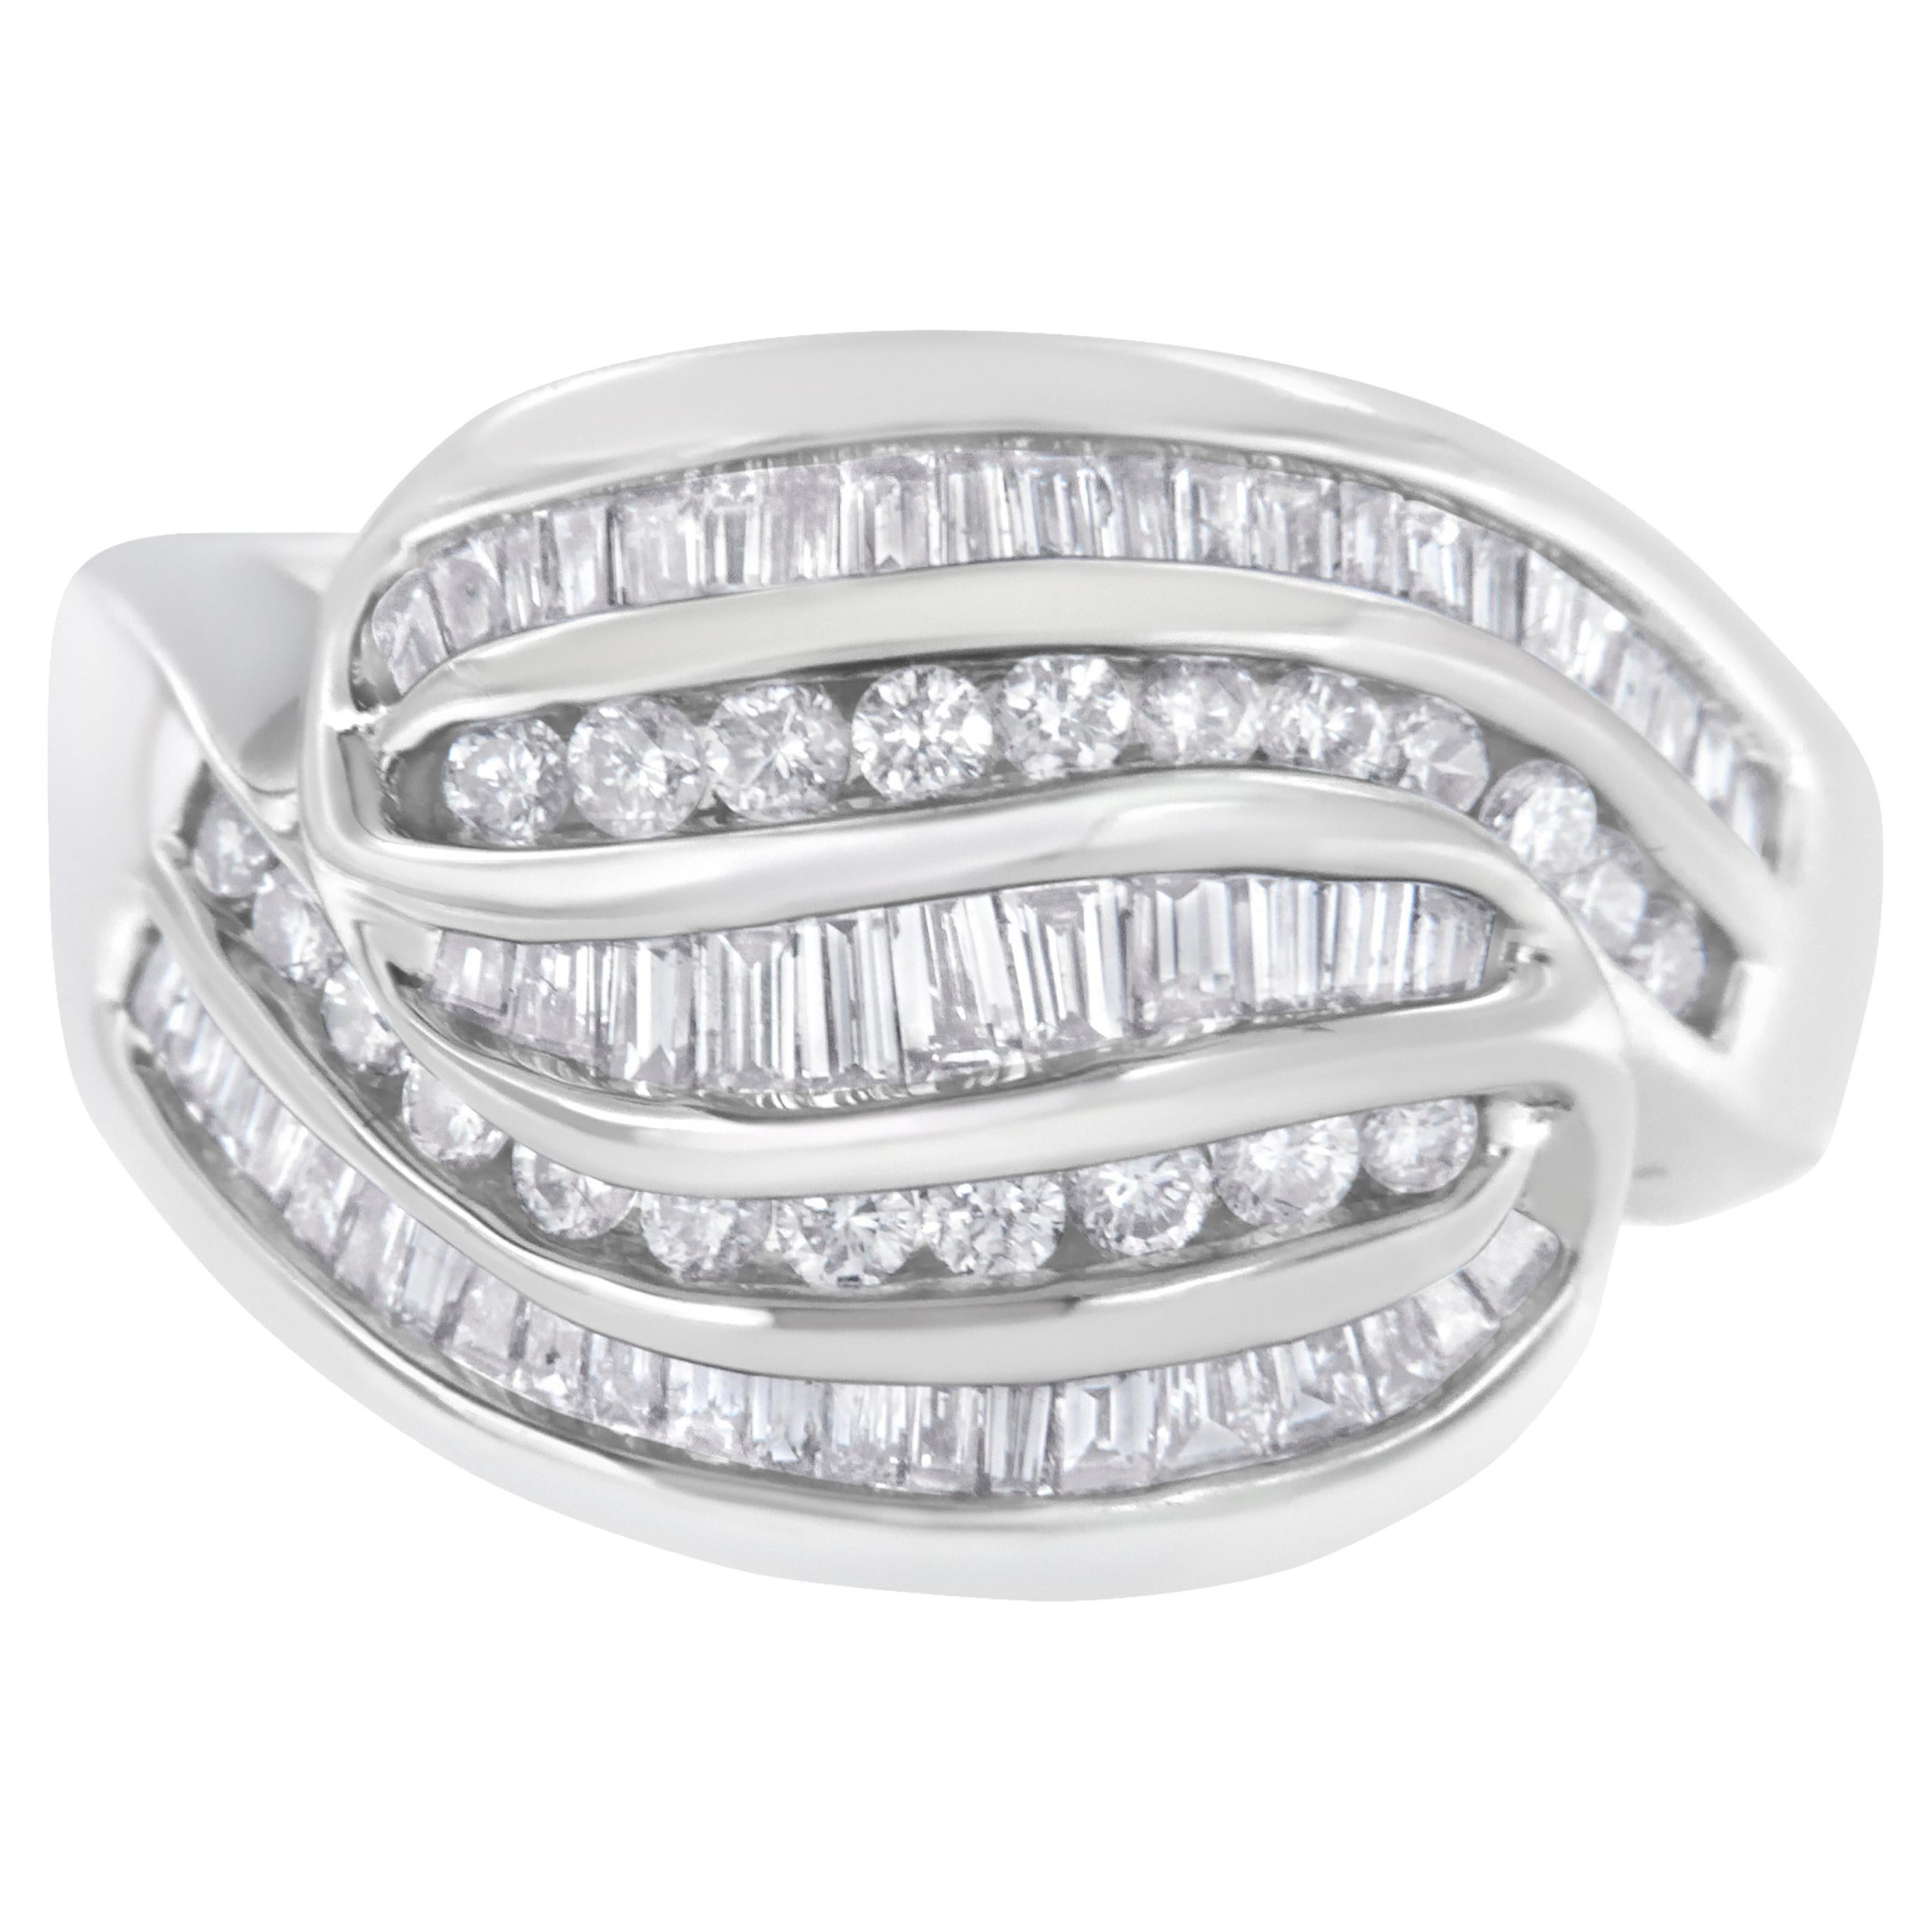 14K White Gold 1.0 Carat Diamond Bypass Band Ring For Sale